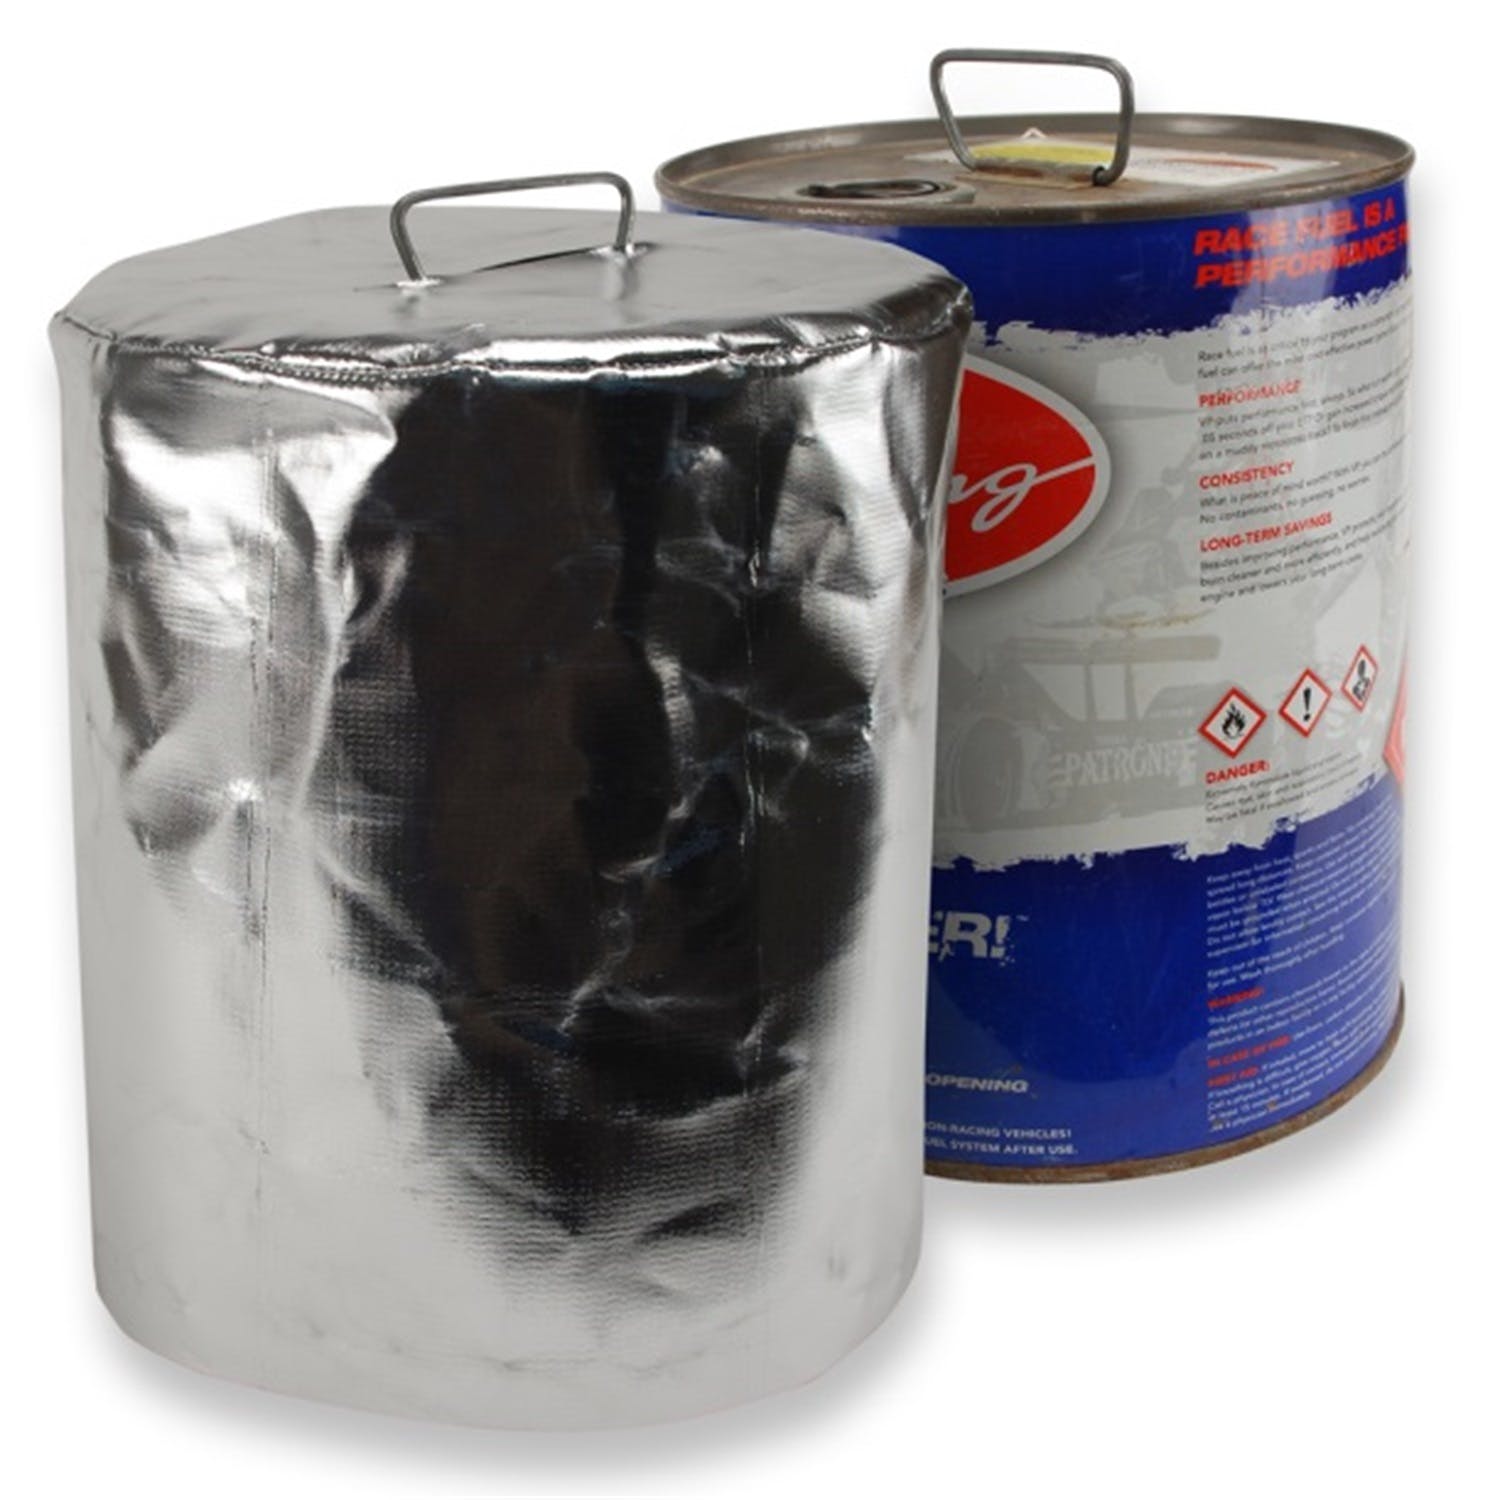 Design Engineering, Inc. 10467 Reflective Aluminized 5 Gallon Metal Round Race Fuel Can Cover